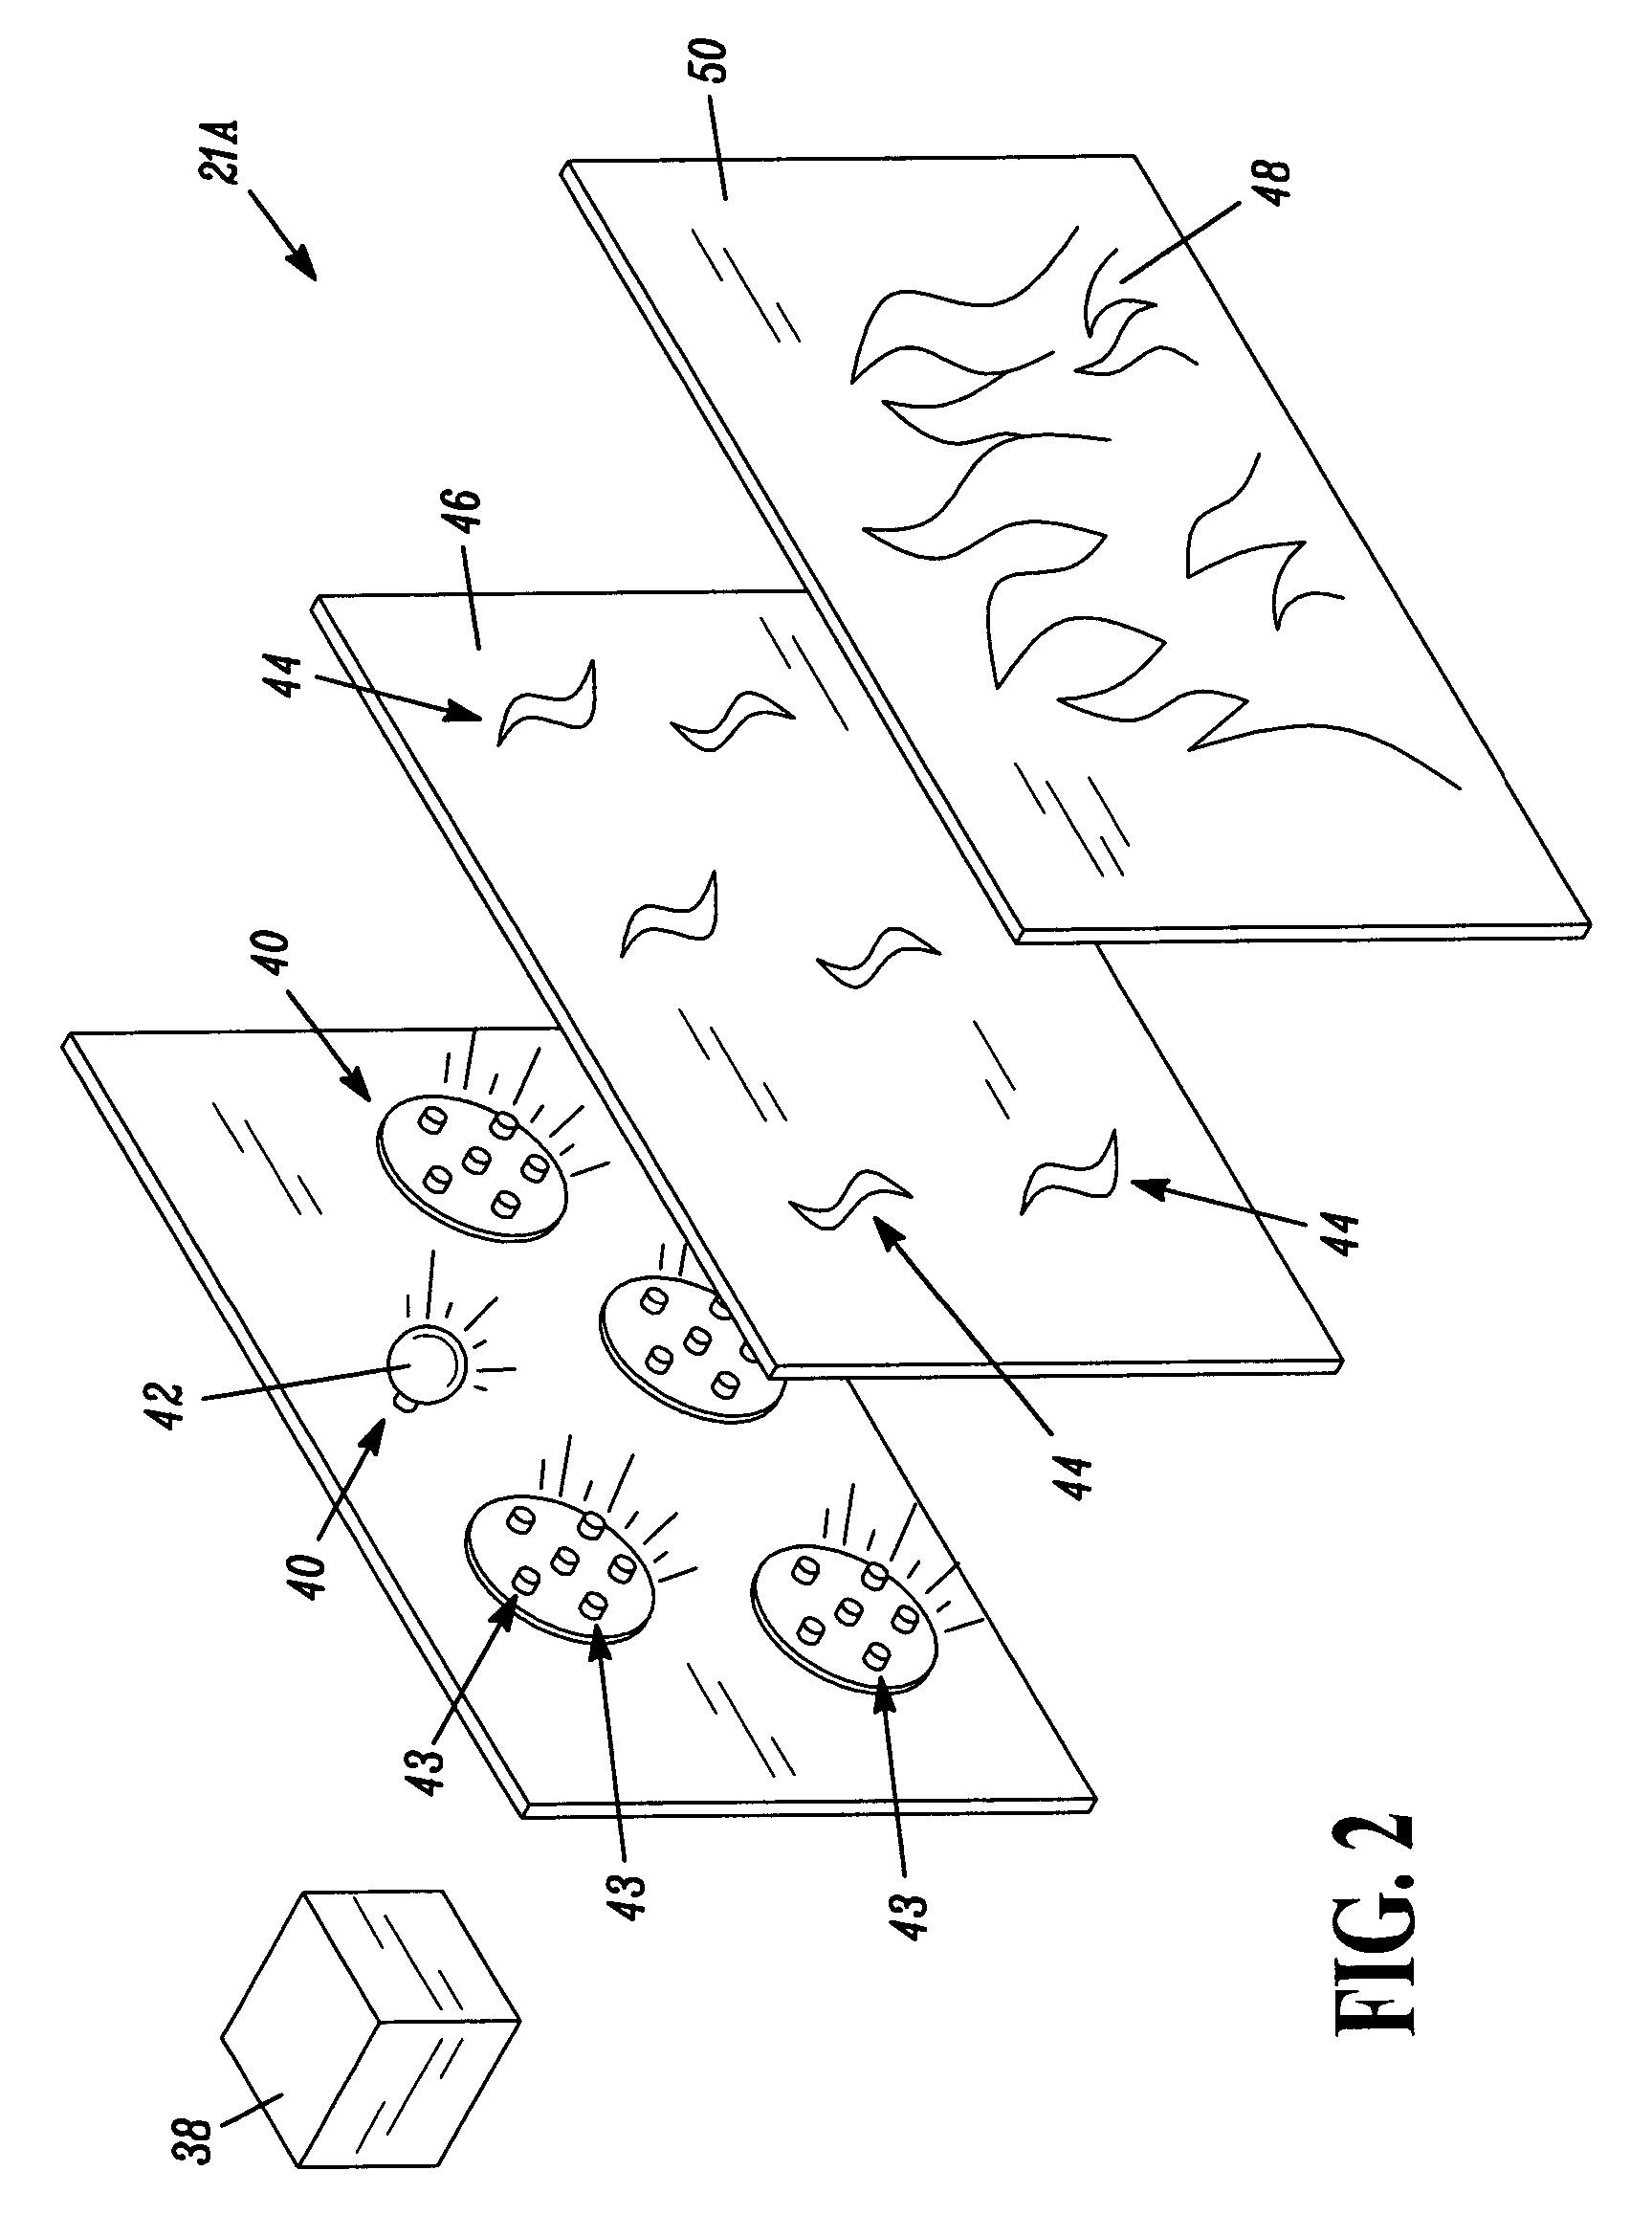 Apparatus and method for simulation of combustion effects in a fireplace